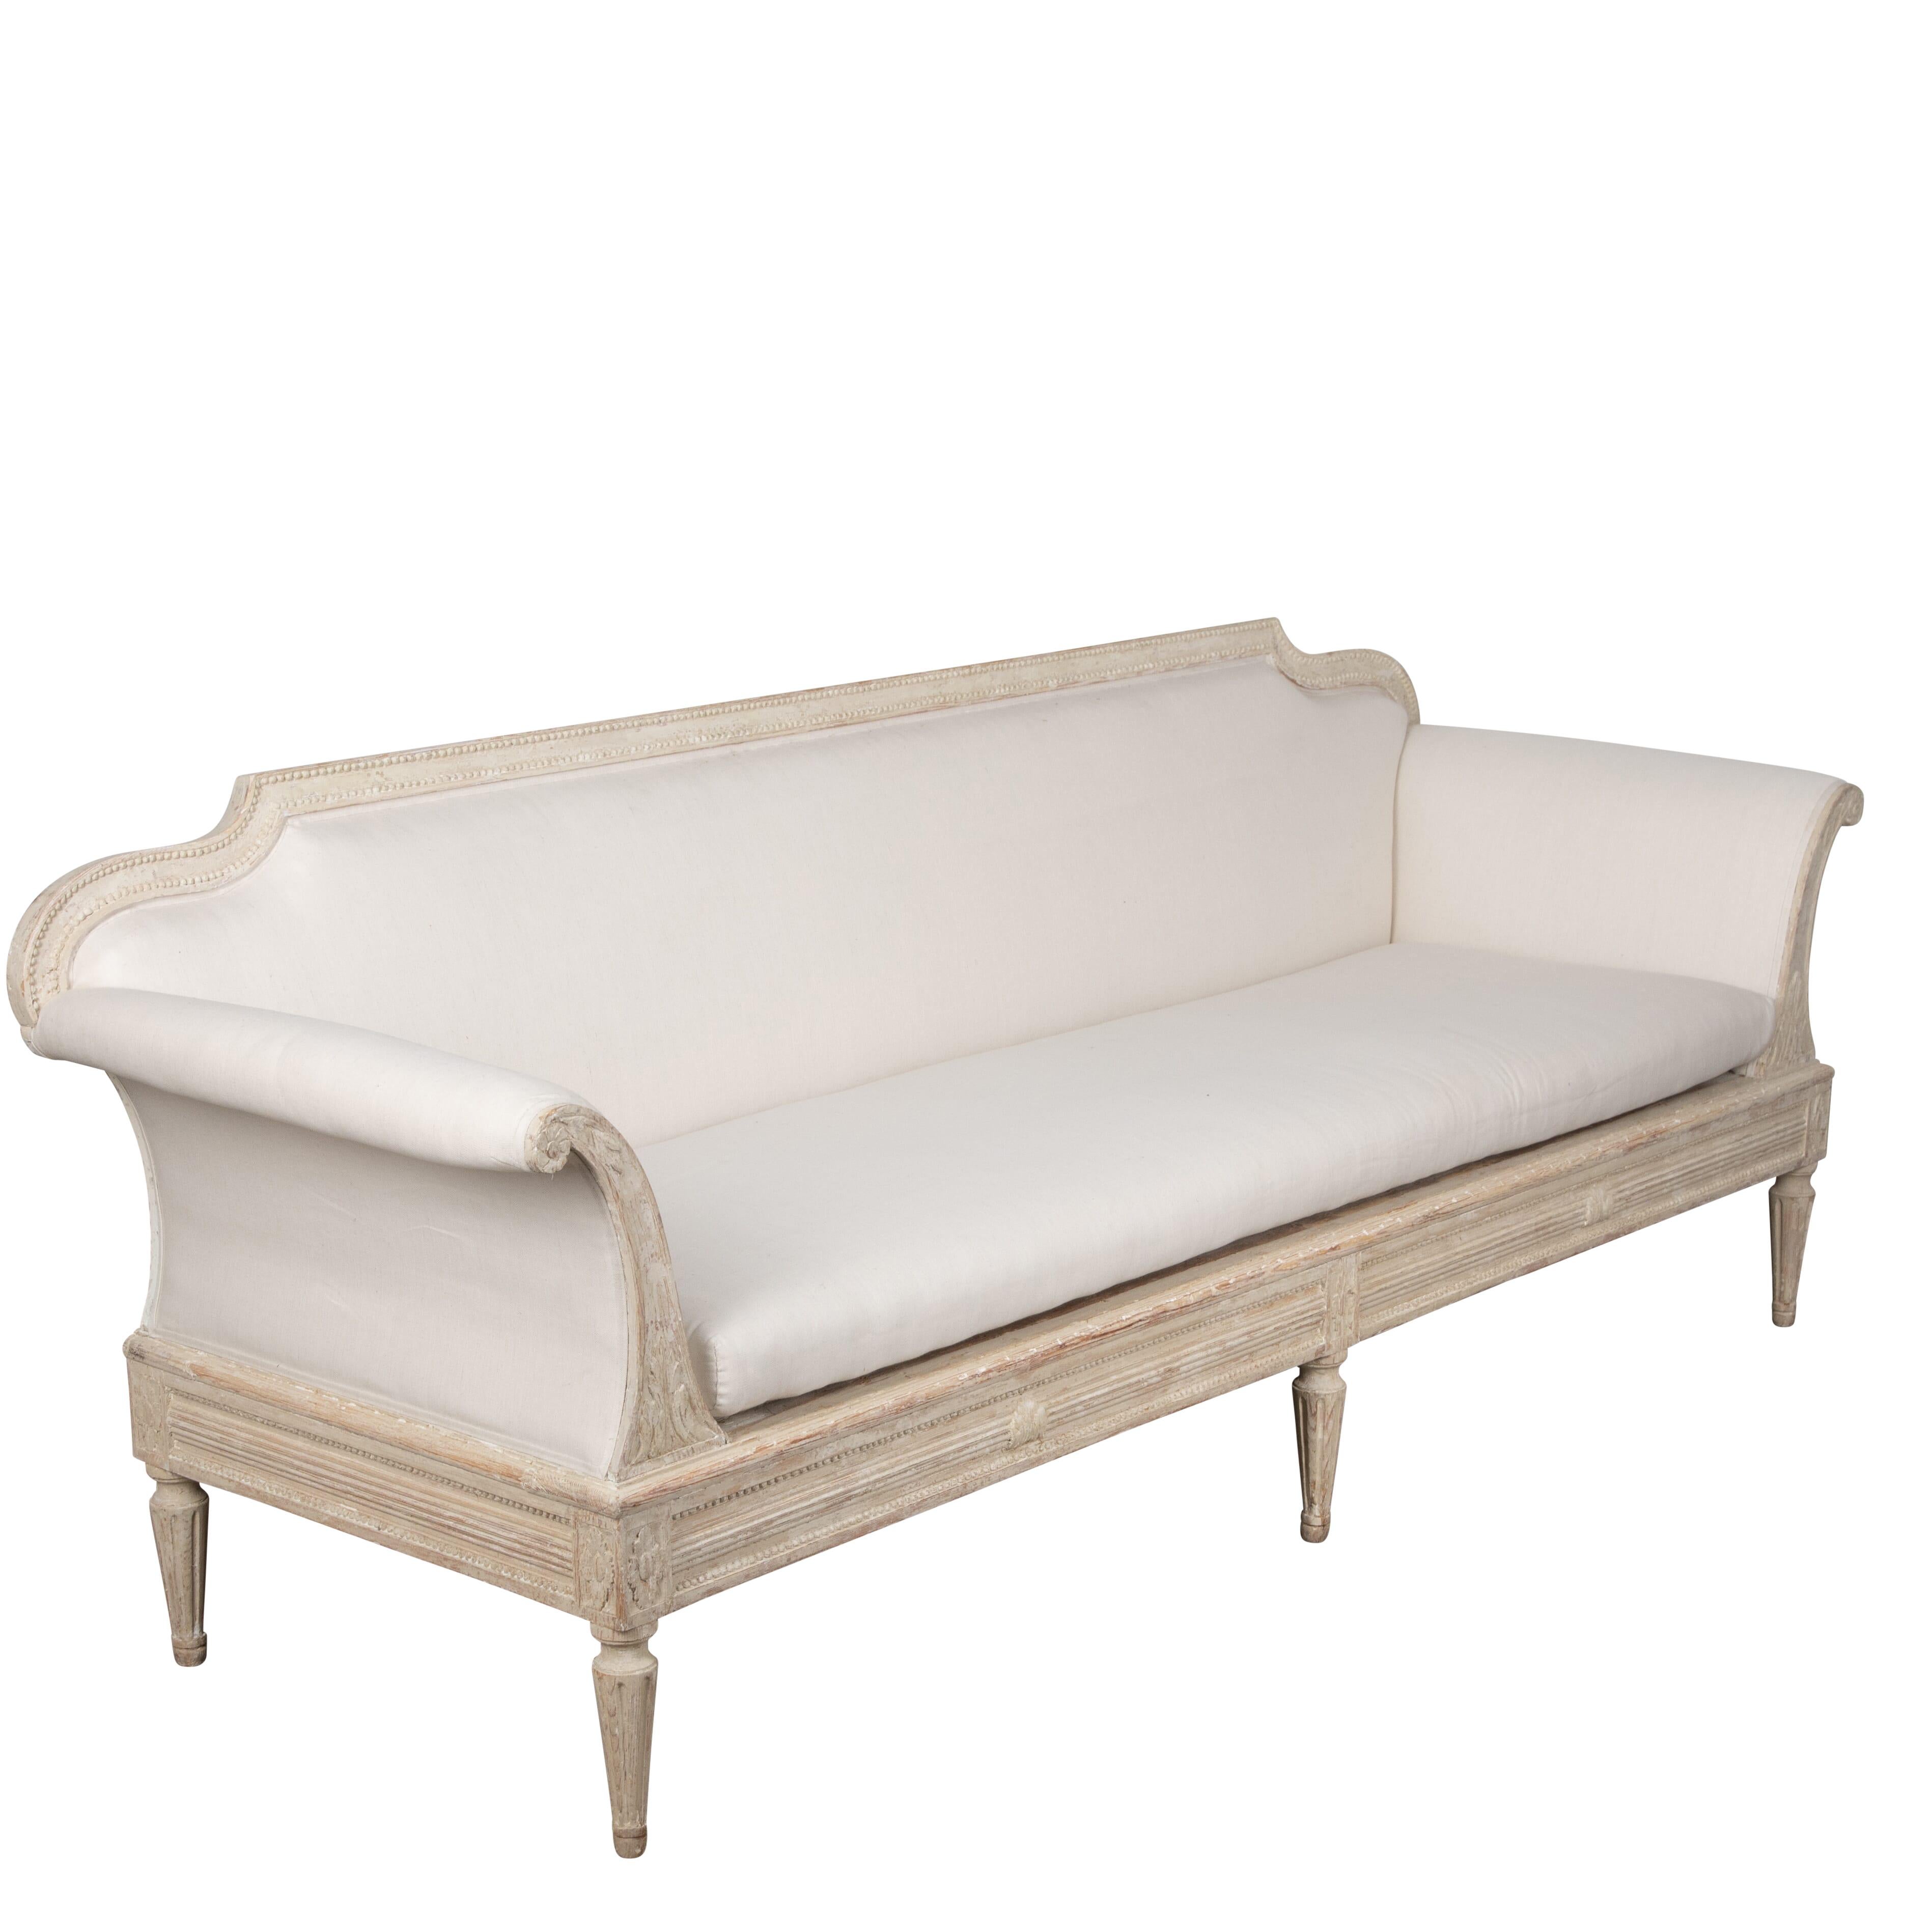 19th Century Gustavian sofa in the Manor House style.
With carved decoration on the arms, legs and apron.
This sofa has a detachable back so could also be used as a daybed.